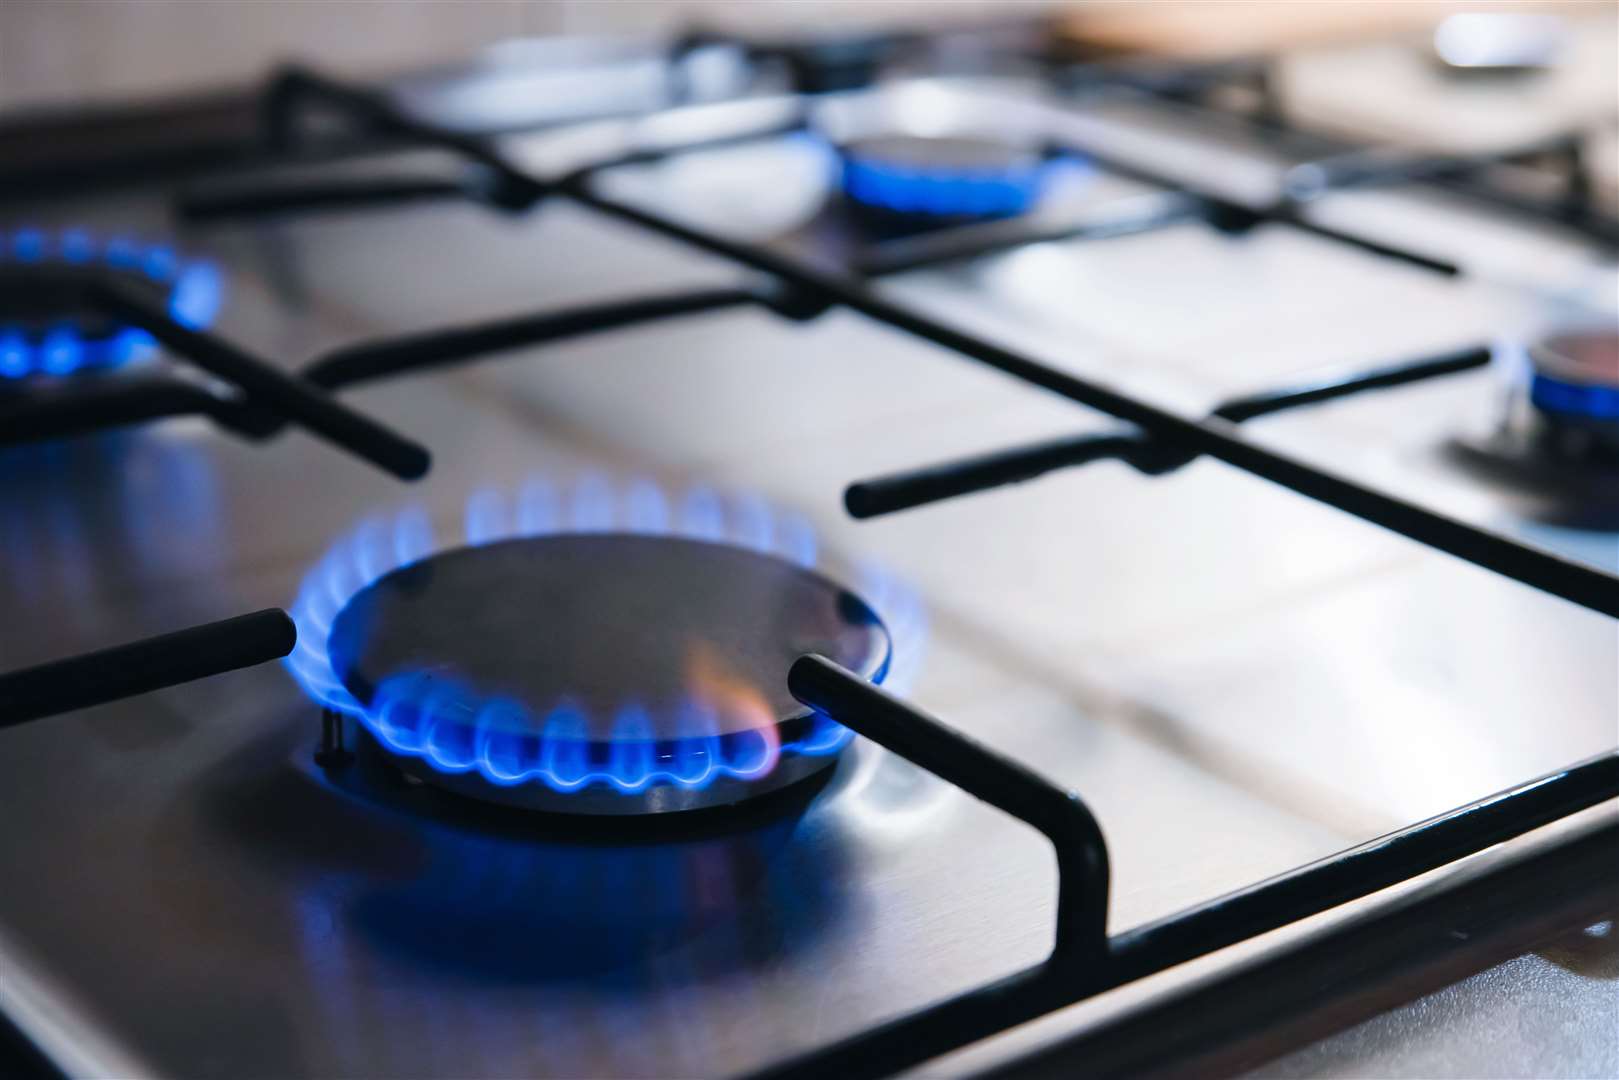 The increase in the energy price cap this autumn 'will be a real worry for a huge number of older Scots', according to the charity Age Scotland.